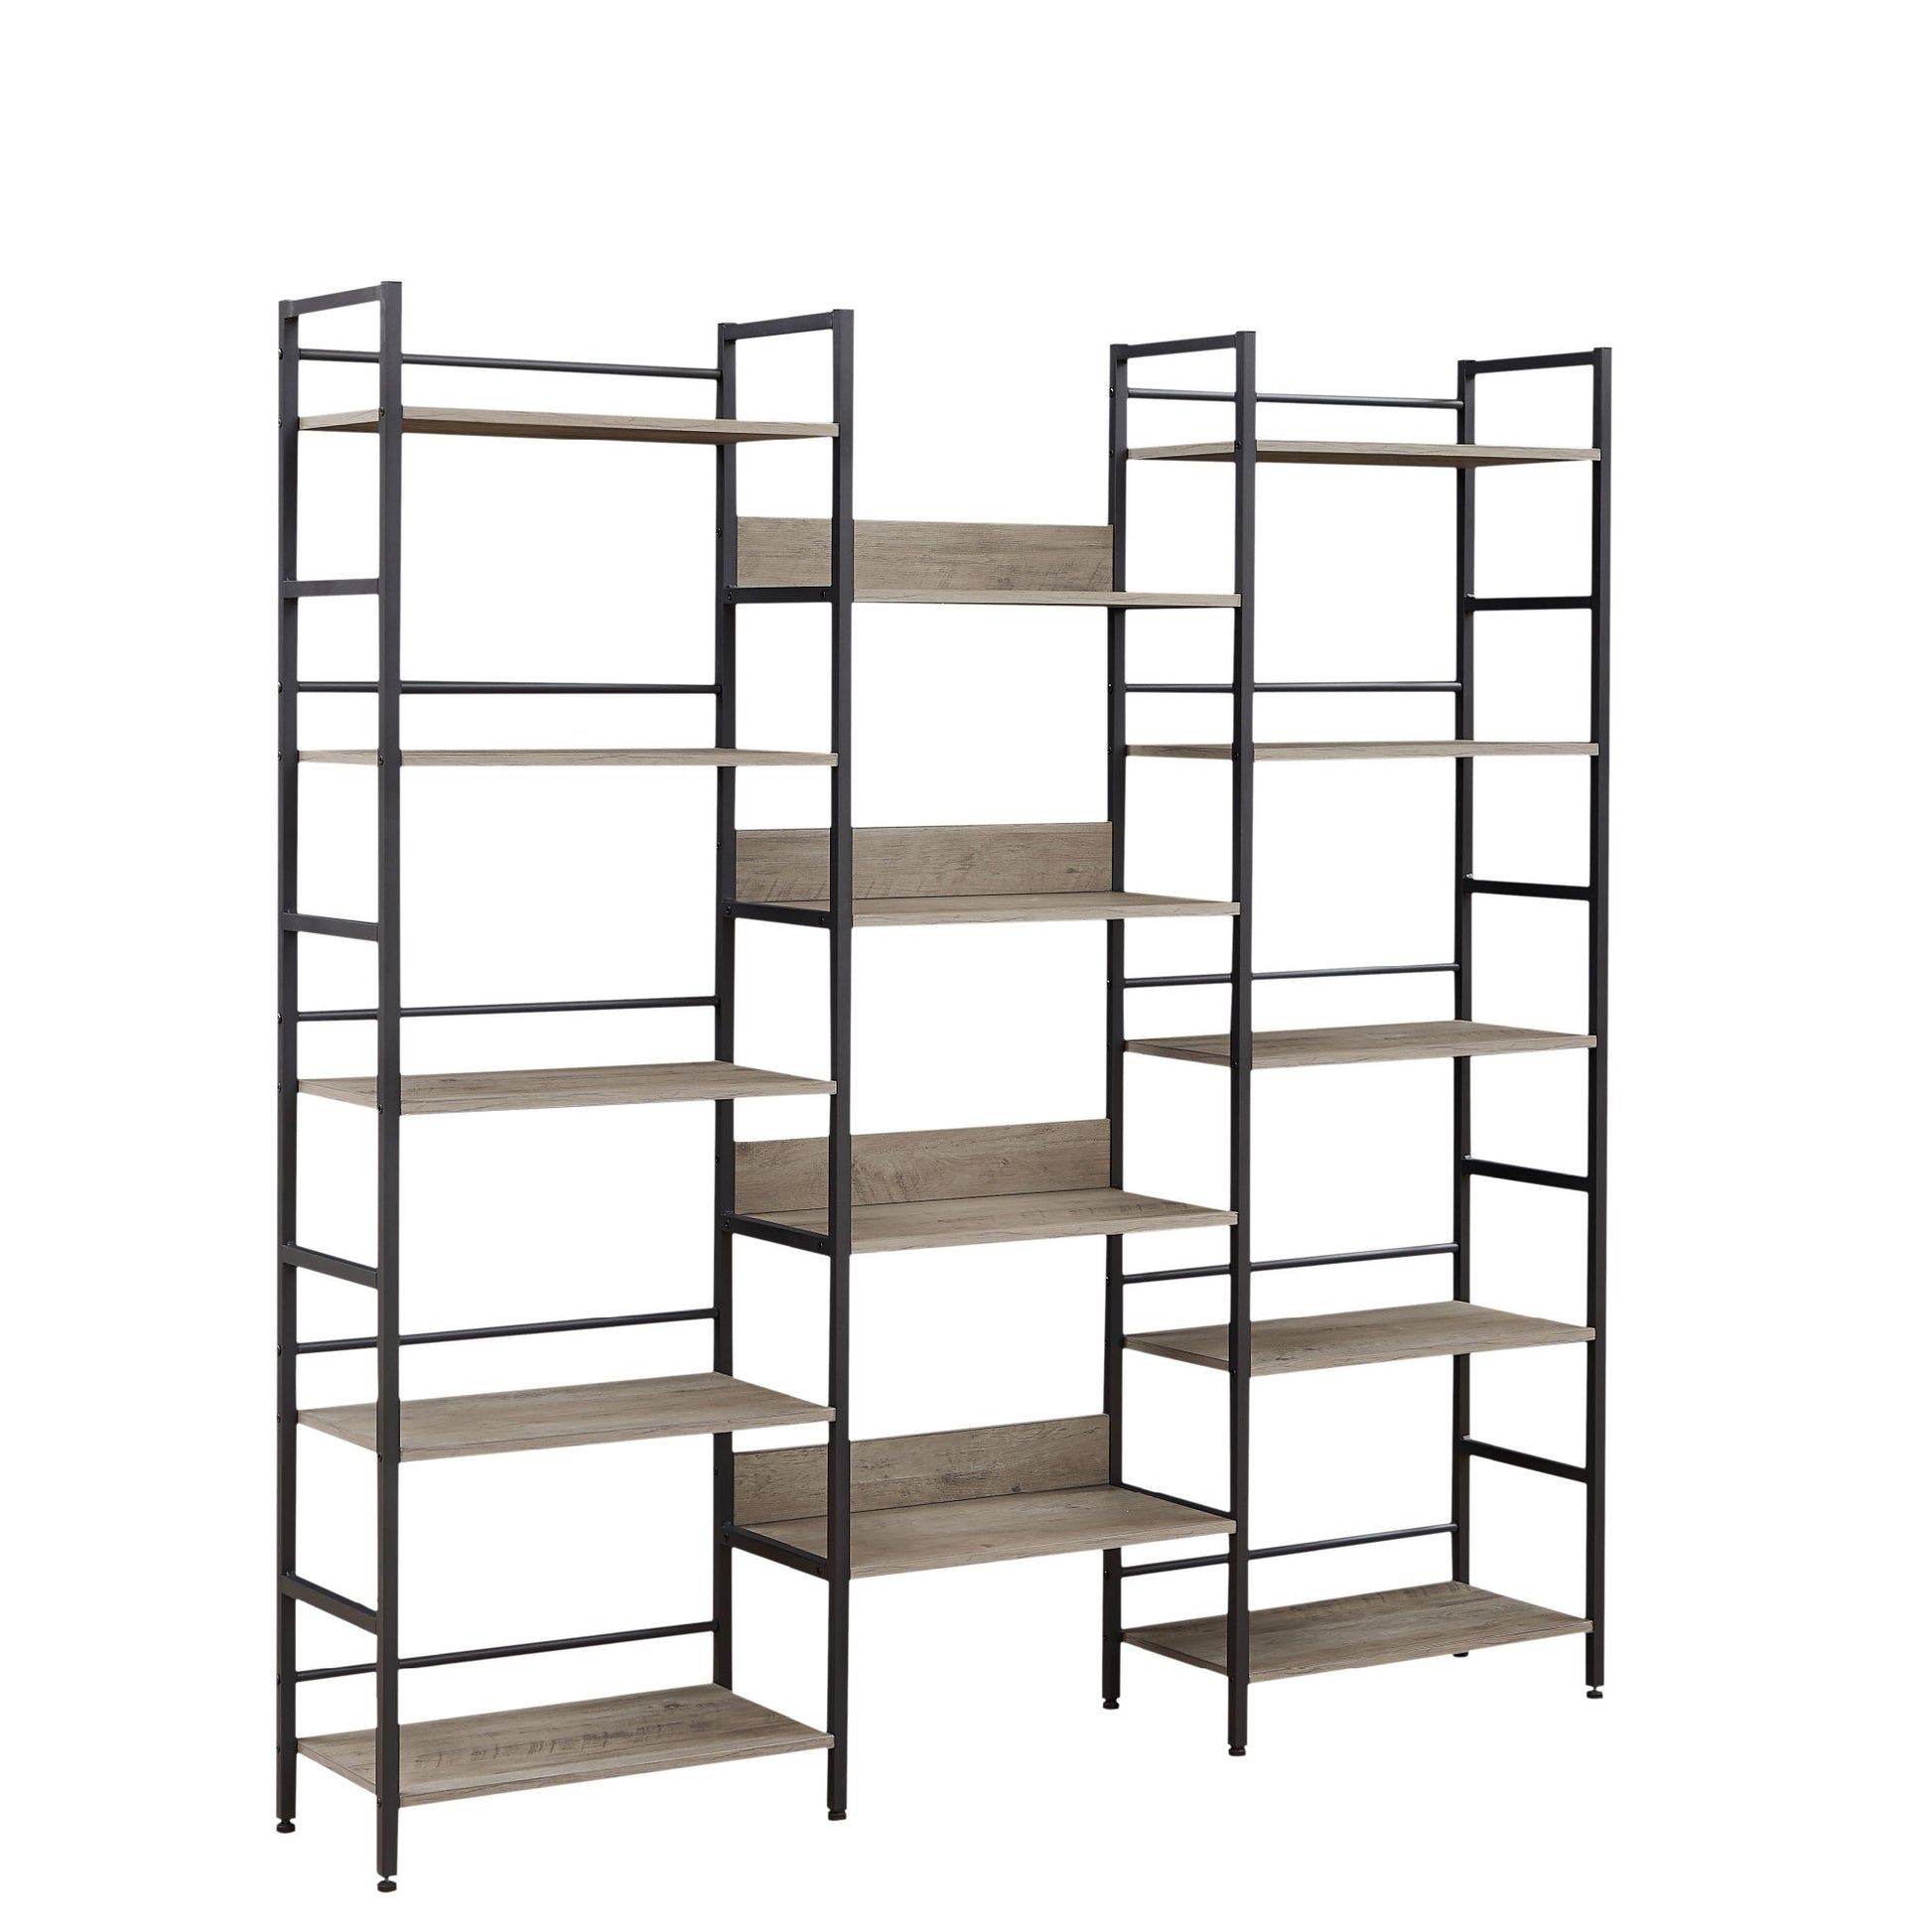 Triple Wide 5-shelf Bookshelves Industrial Retro Wooden Style Home and Office Large Open Bookshelves, Grey, 69.3"W x 11.8"D x 70.1"H - Home Decor by Design